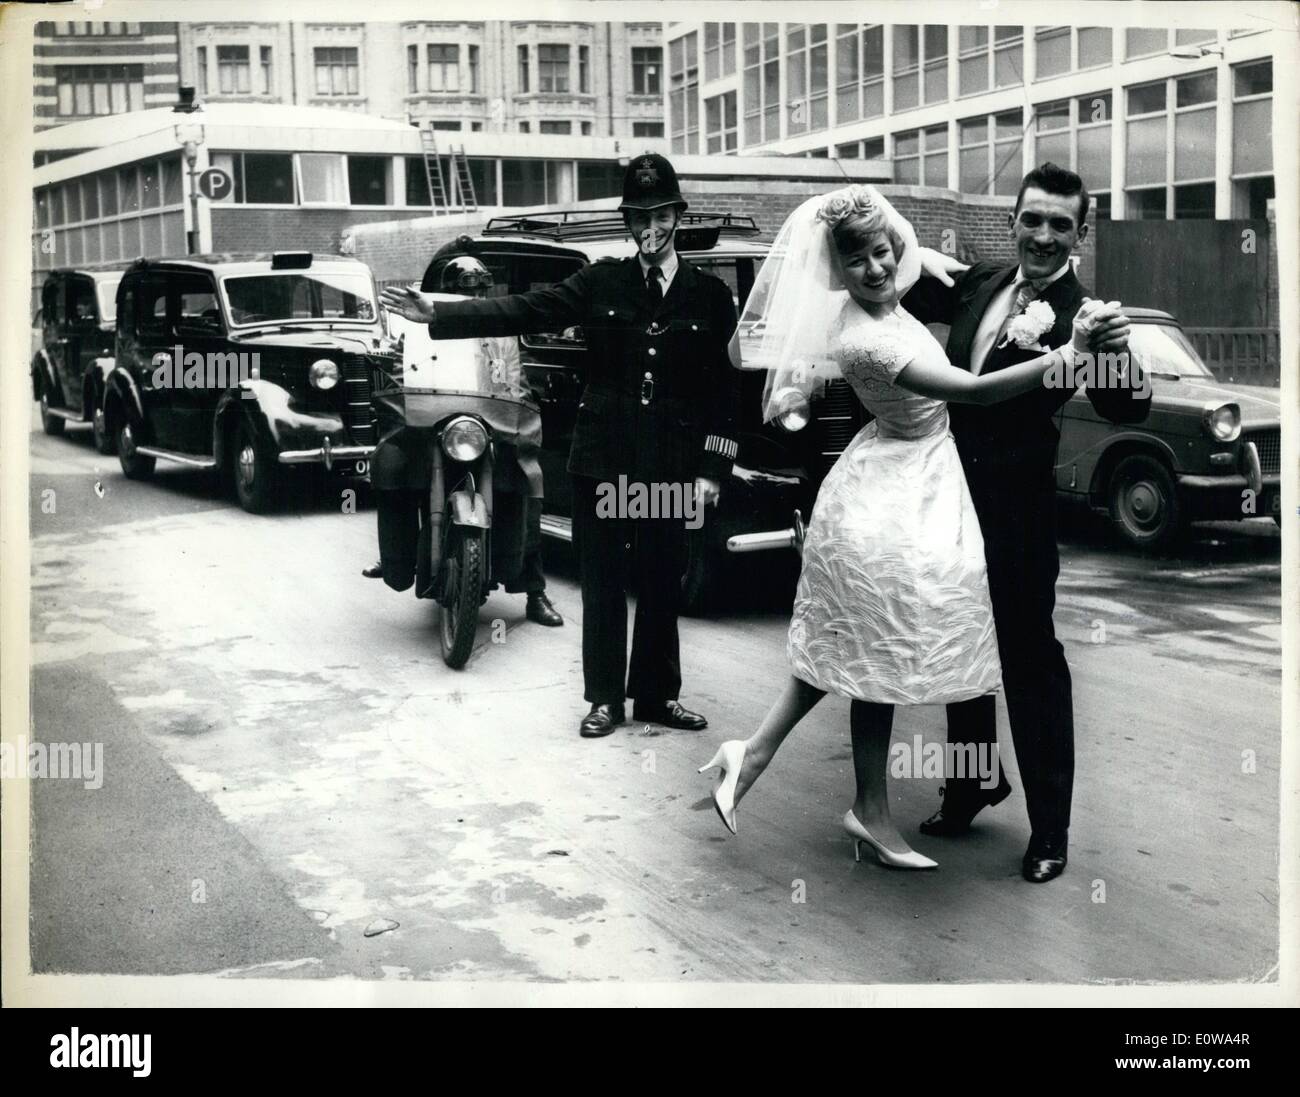 Apr. 04, 1962 - Dance Champions marry today: The marriage of John Donaldson, 29 and Sylvia Dearden, 27, the amateur ballroom champions of Essex, took place today at Caxton Hall, London. Photo shows a policeman holds up traffic an the couple dance across Caxton street in London after the wedding today. Stock Photo